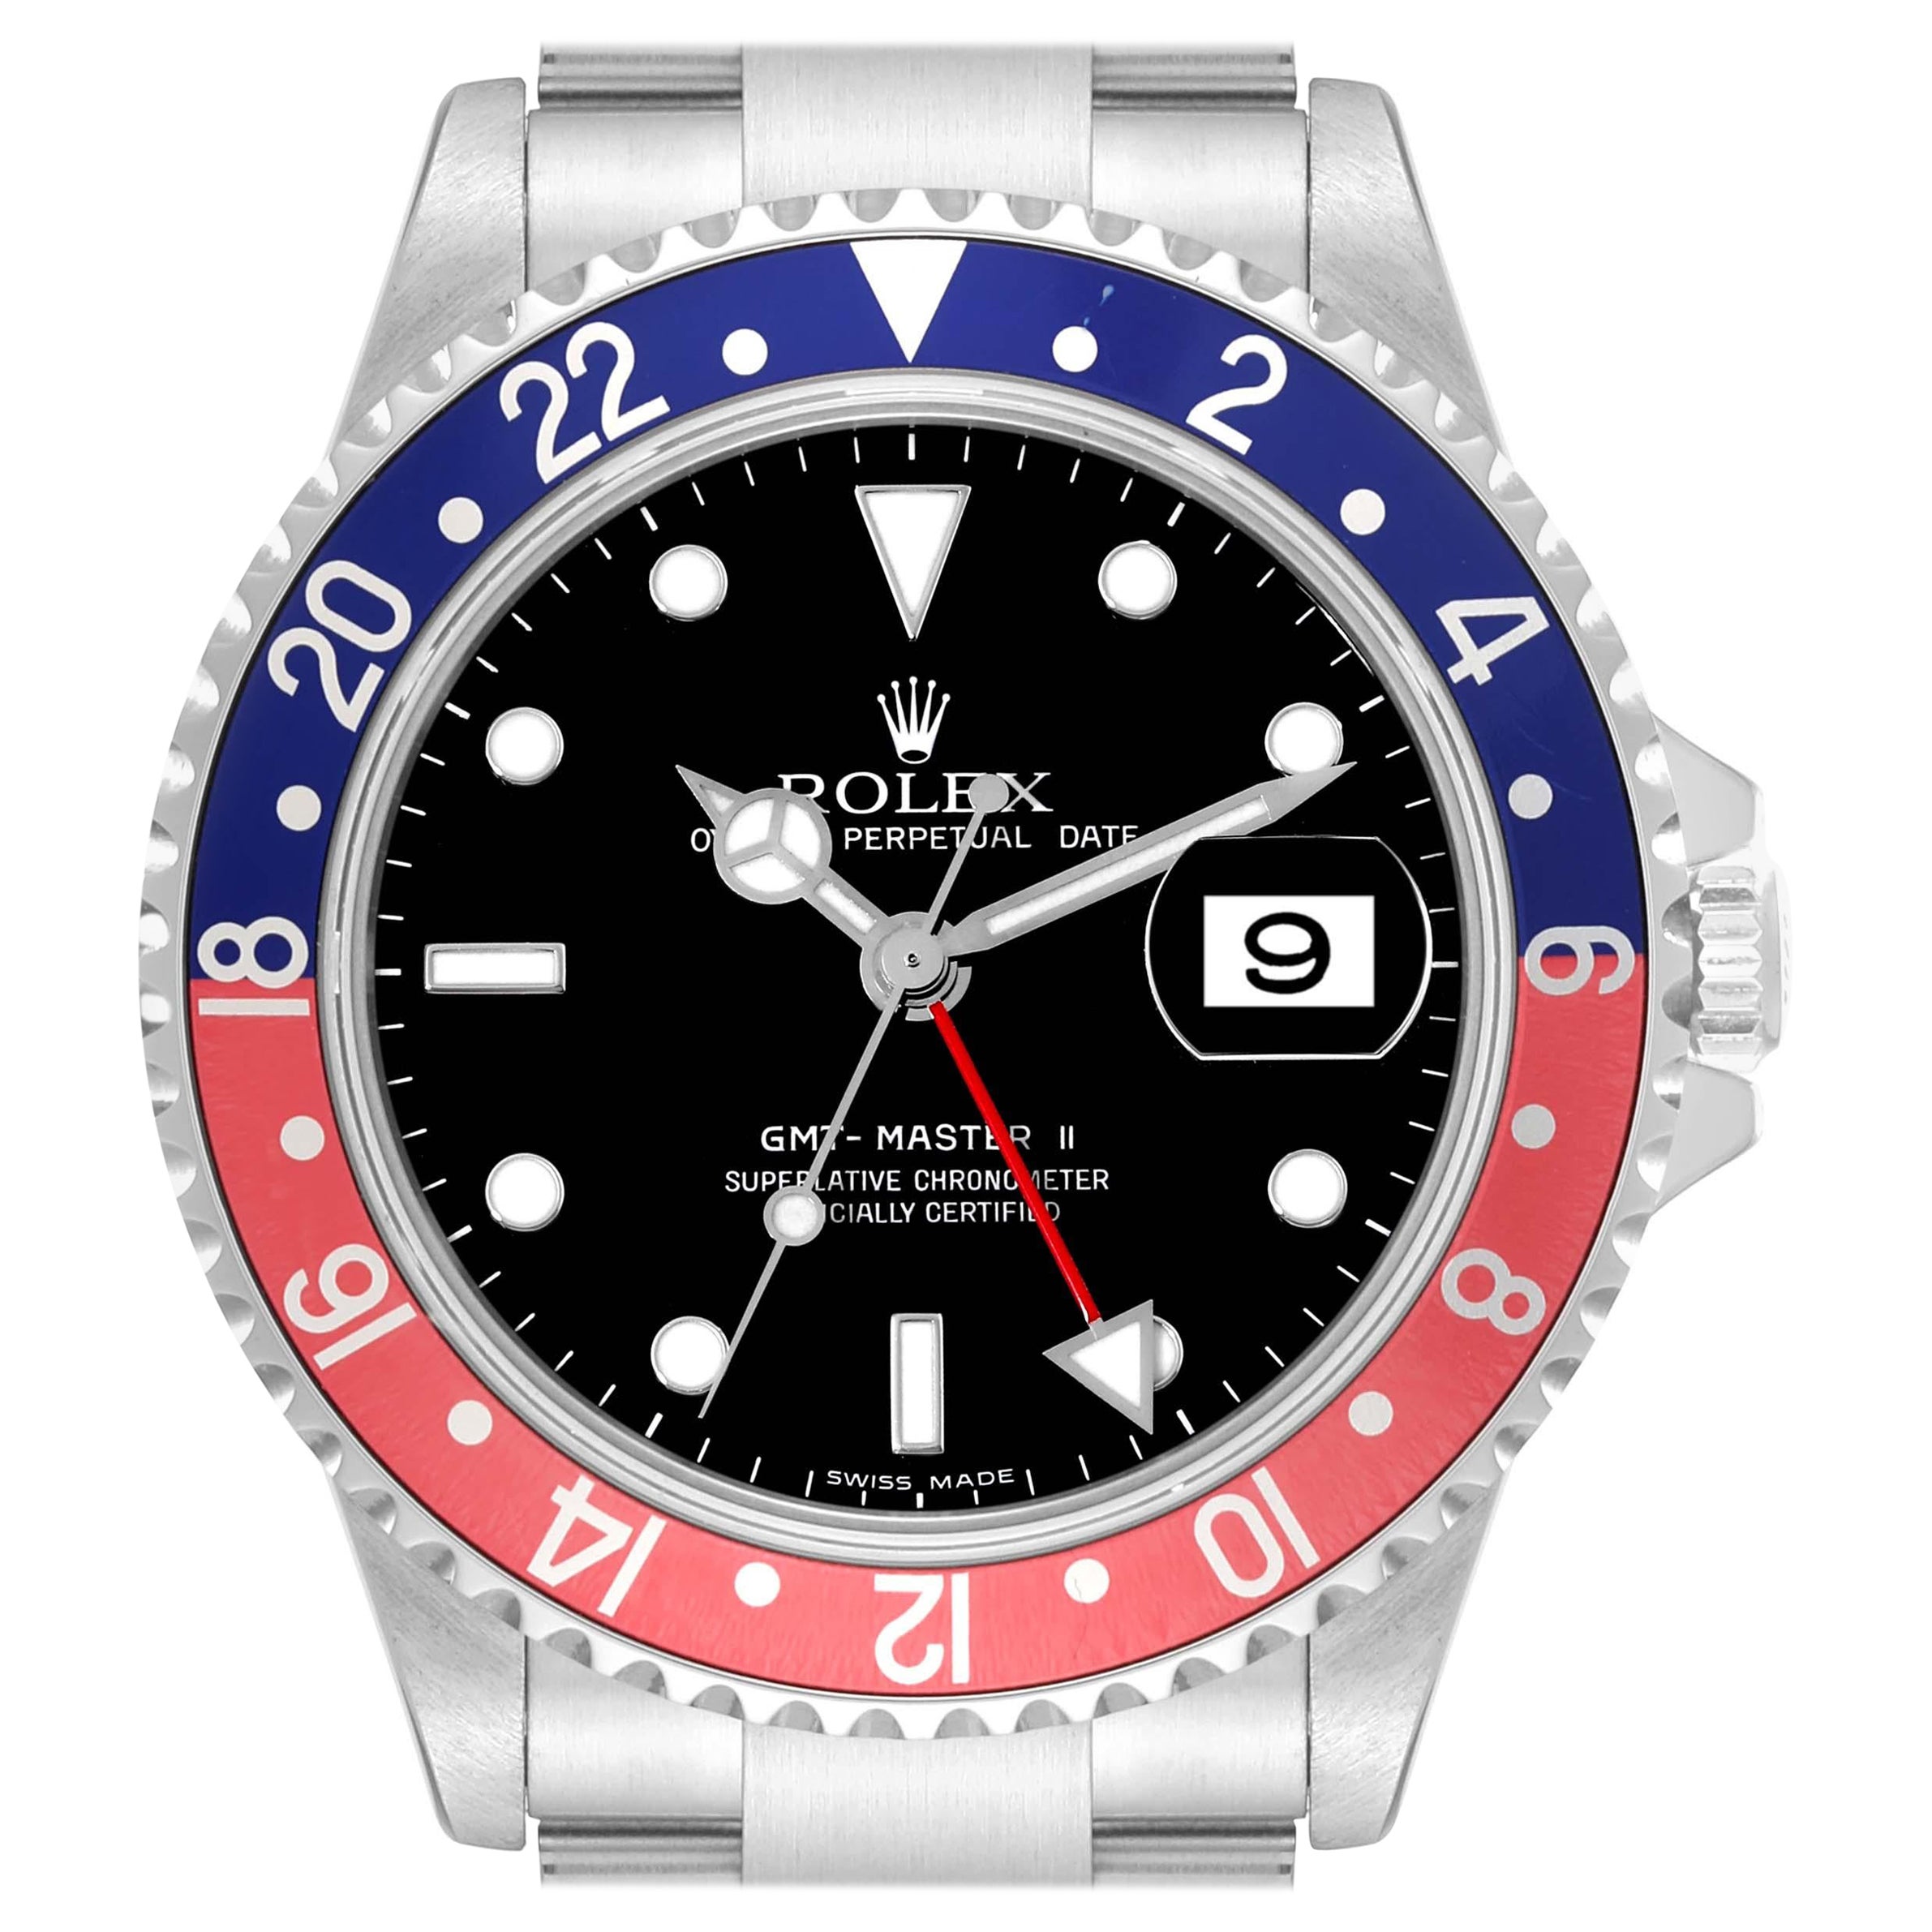 Rolex GMT Master II Blue Red Pepsi Error Dial Steel Mens Watch 16710 Box Papers